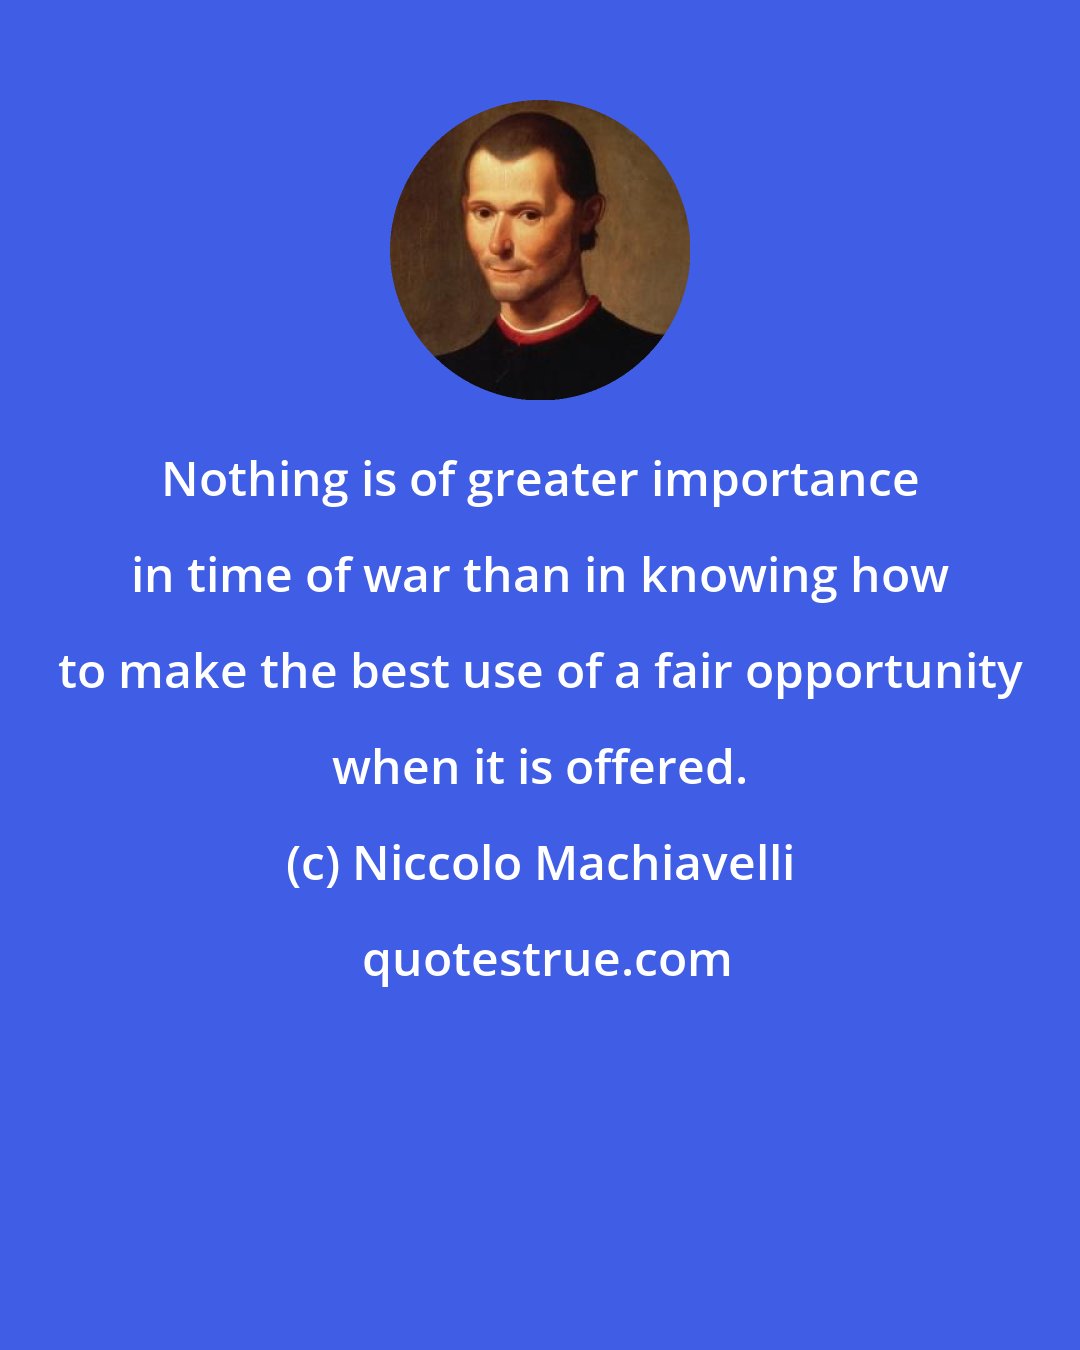 Niccolo Machiavelli: Nothing is of greater importance in time of war than in knowing how to make the best use of a fair opportunity when it is offered.